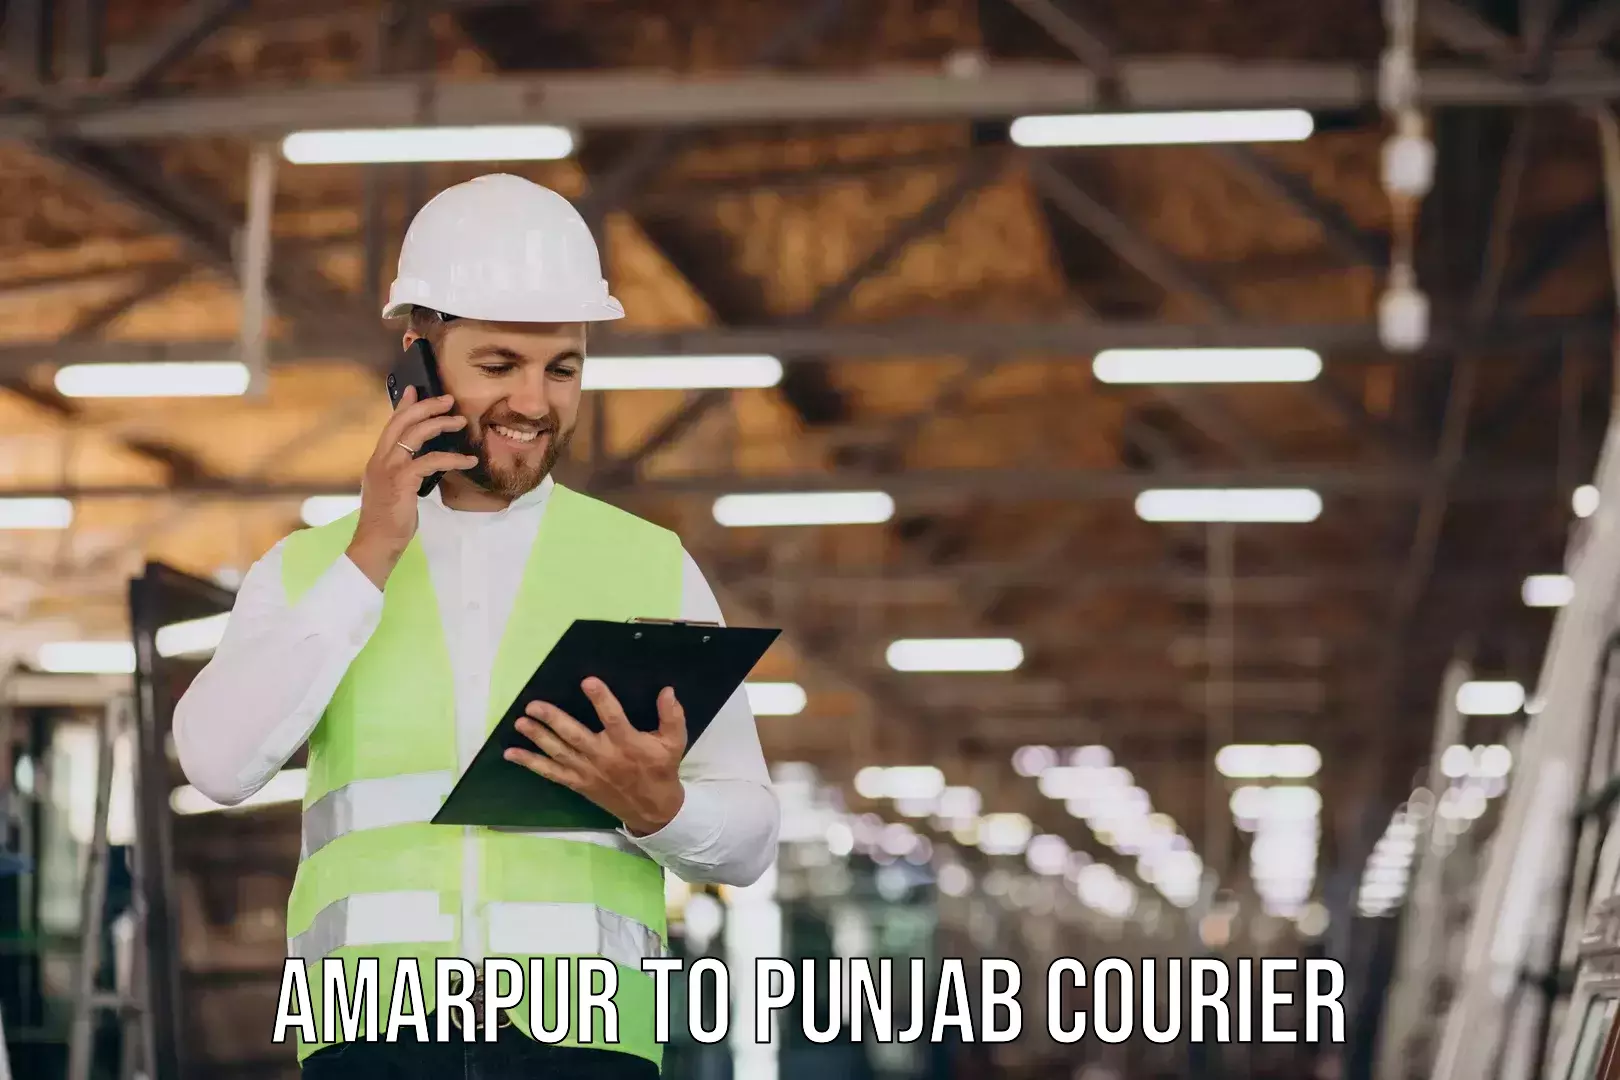 Quality relocation assistance in Amarpur to Punjab